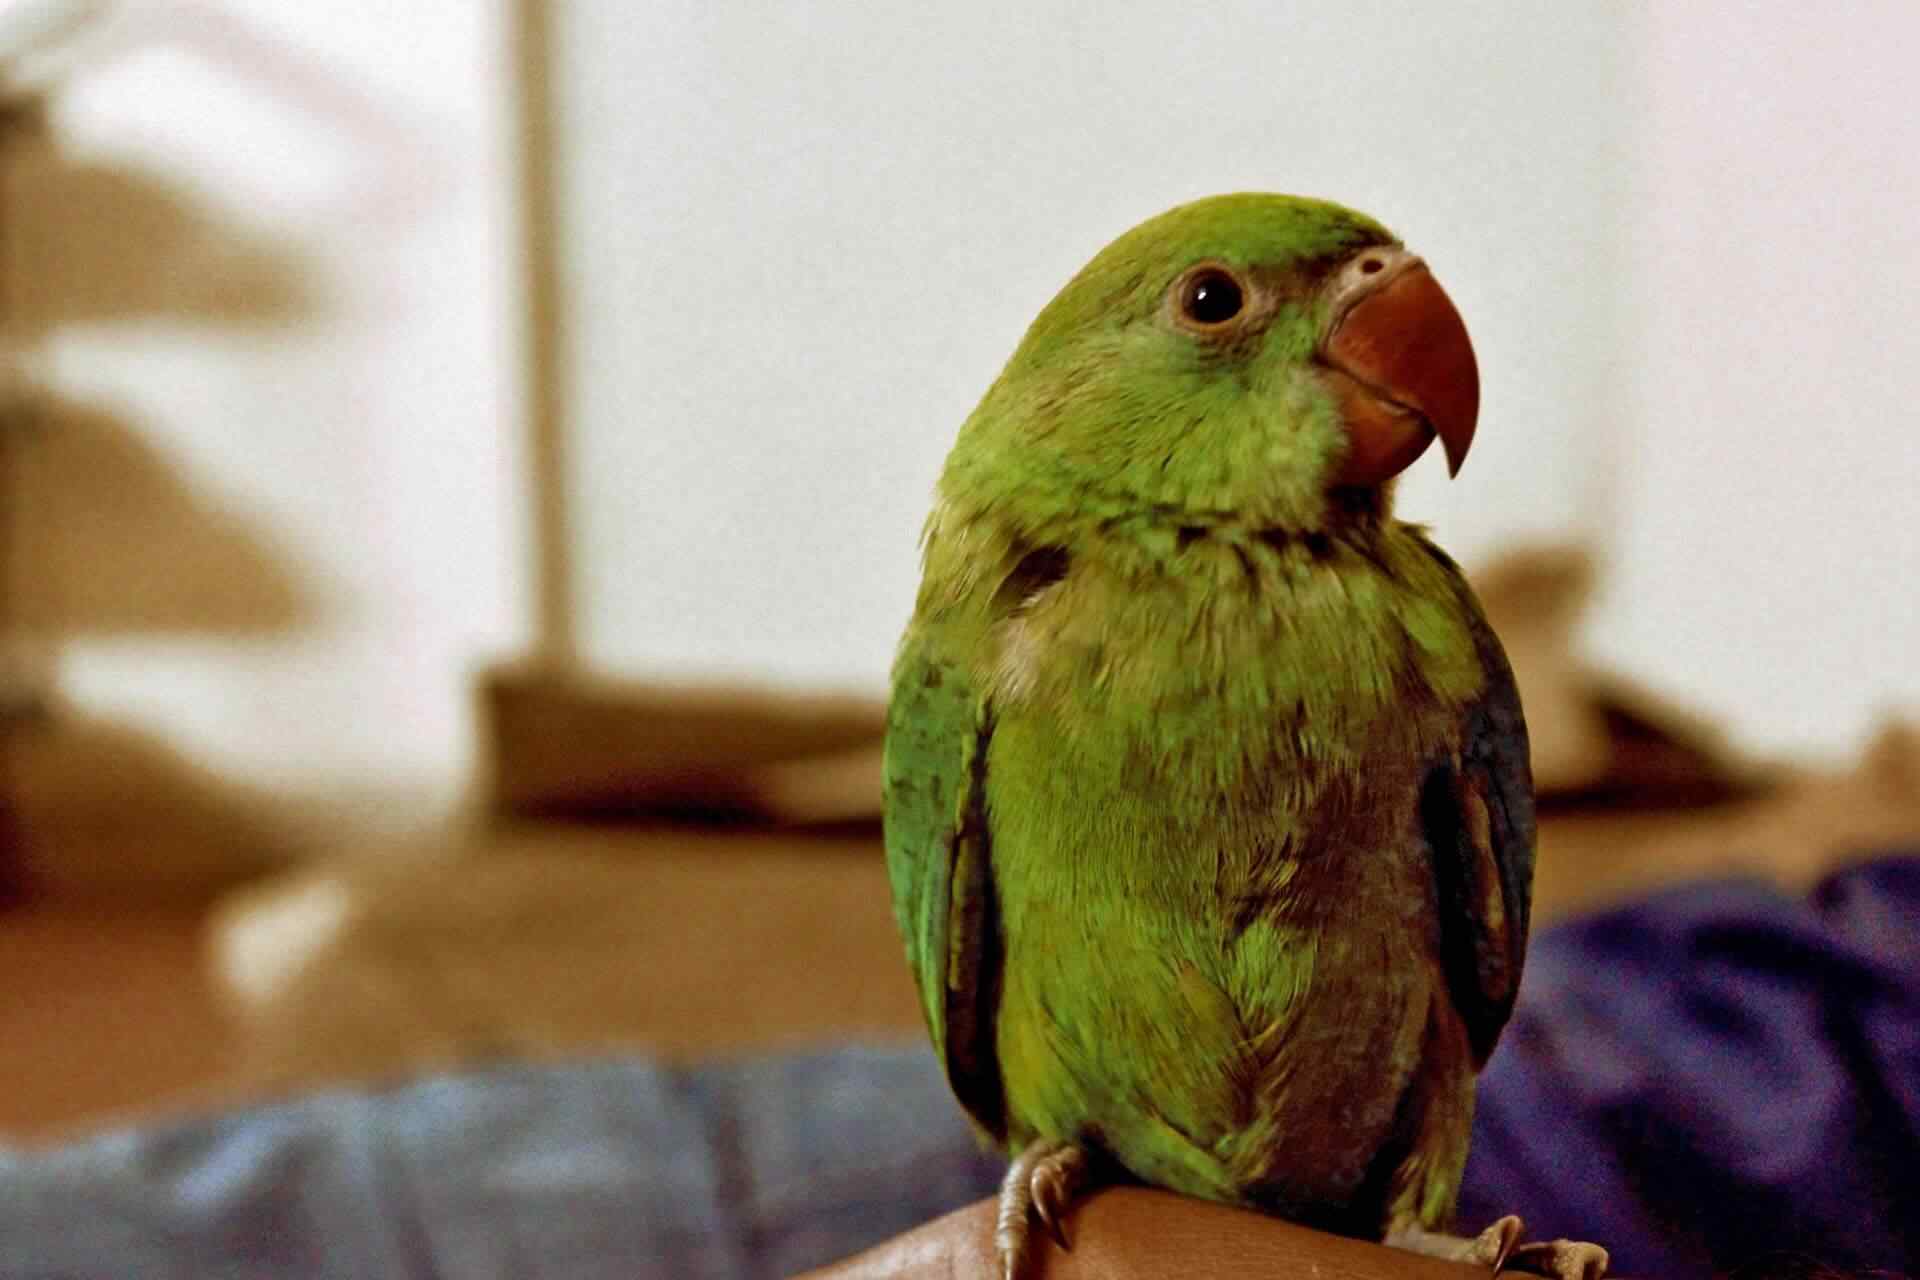 Yes! More Australian night parrots discovered